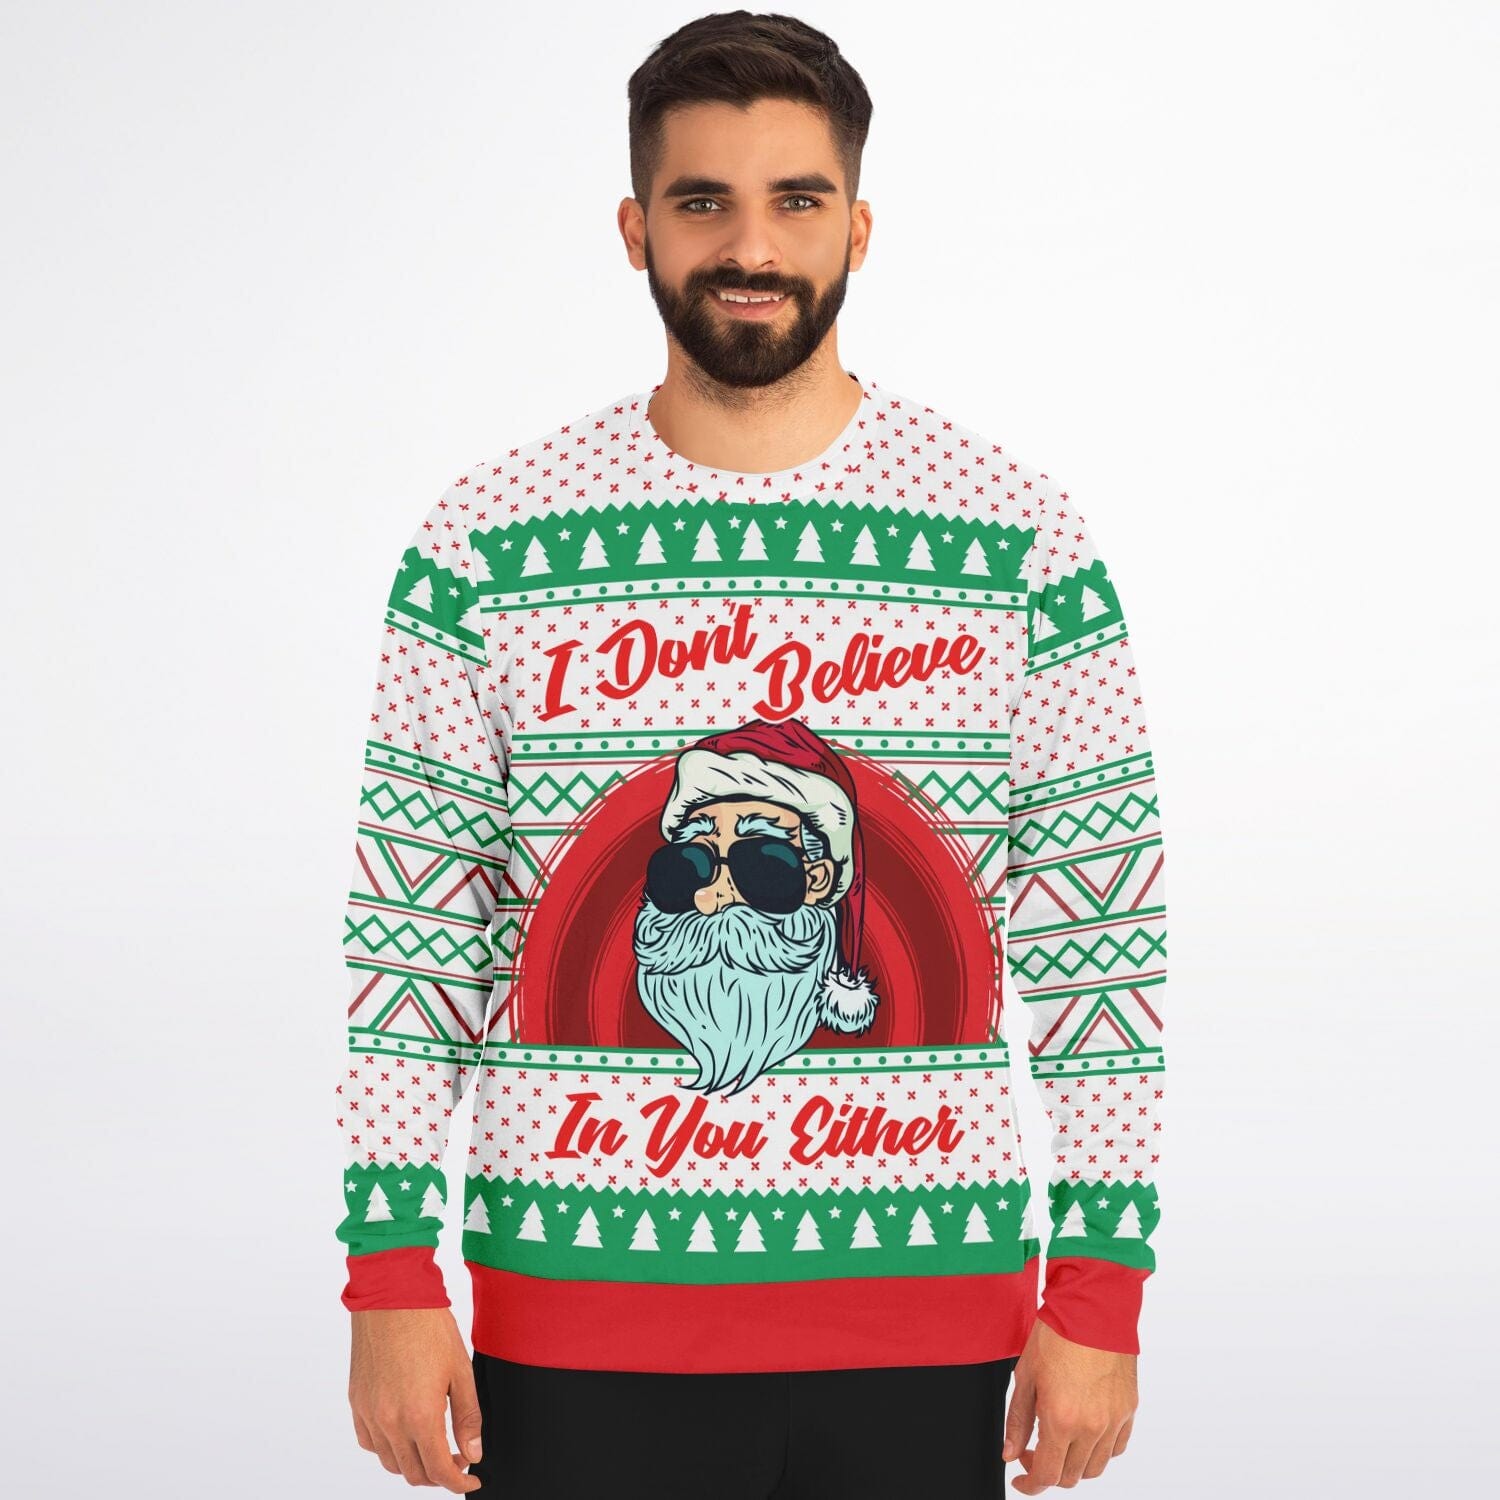 I Don't Believe in You Either - Funny Santa Ugly Christmas Sweater (Sweatshirt)